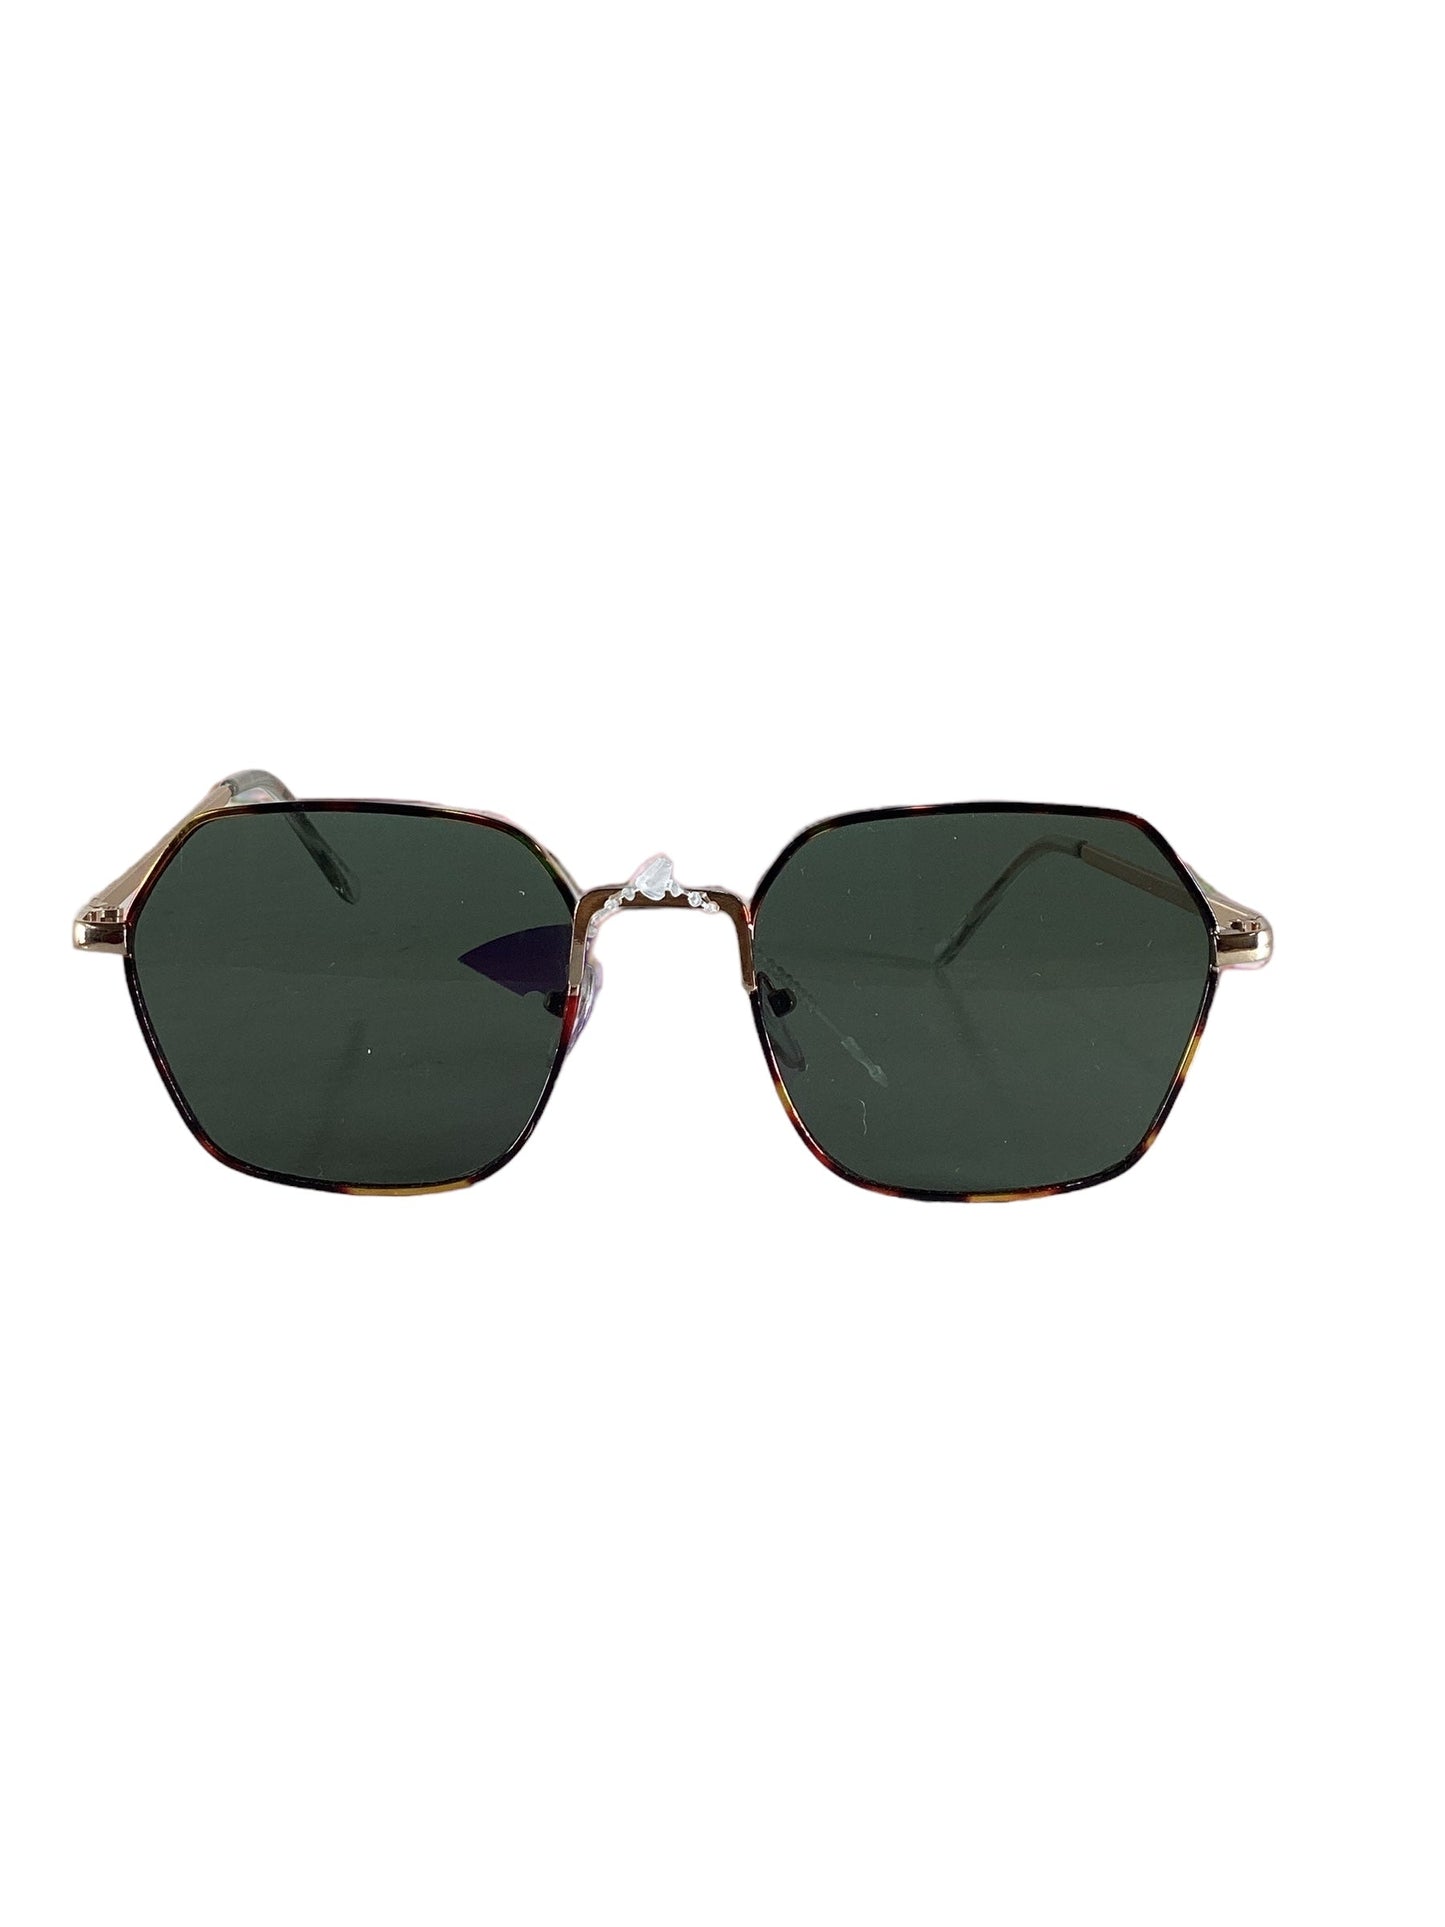 Sunglasses By Free People